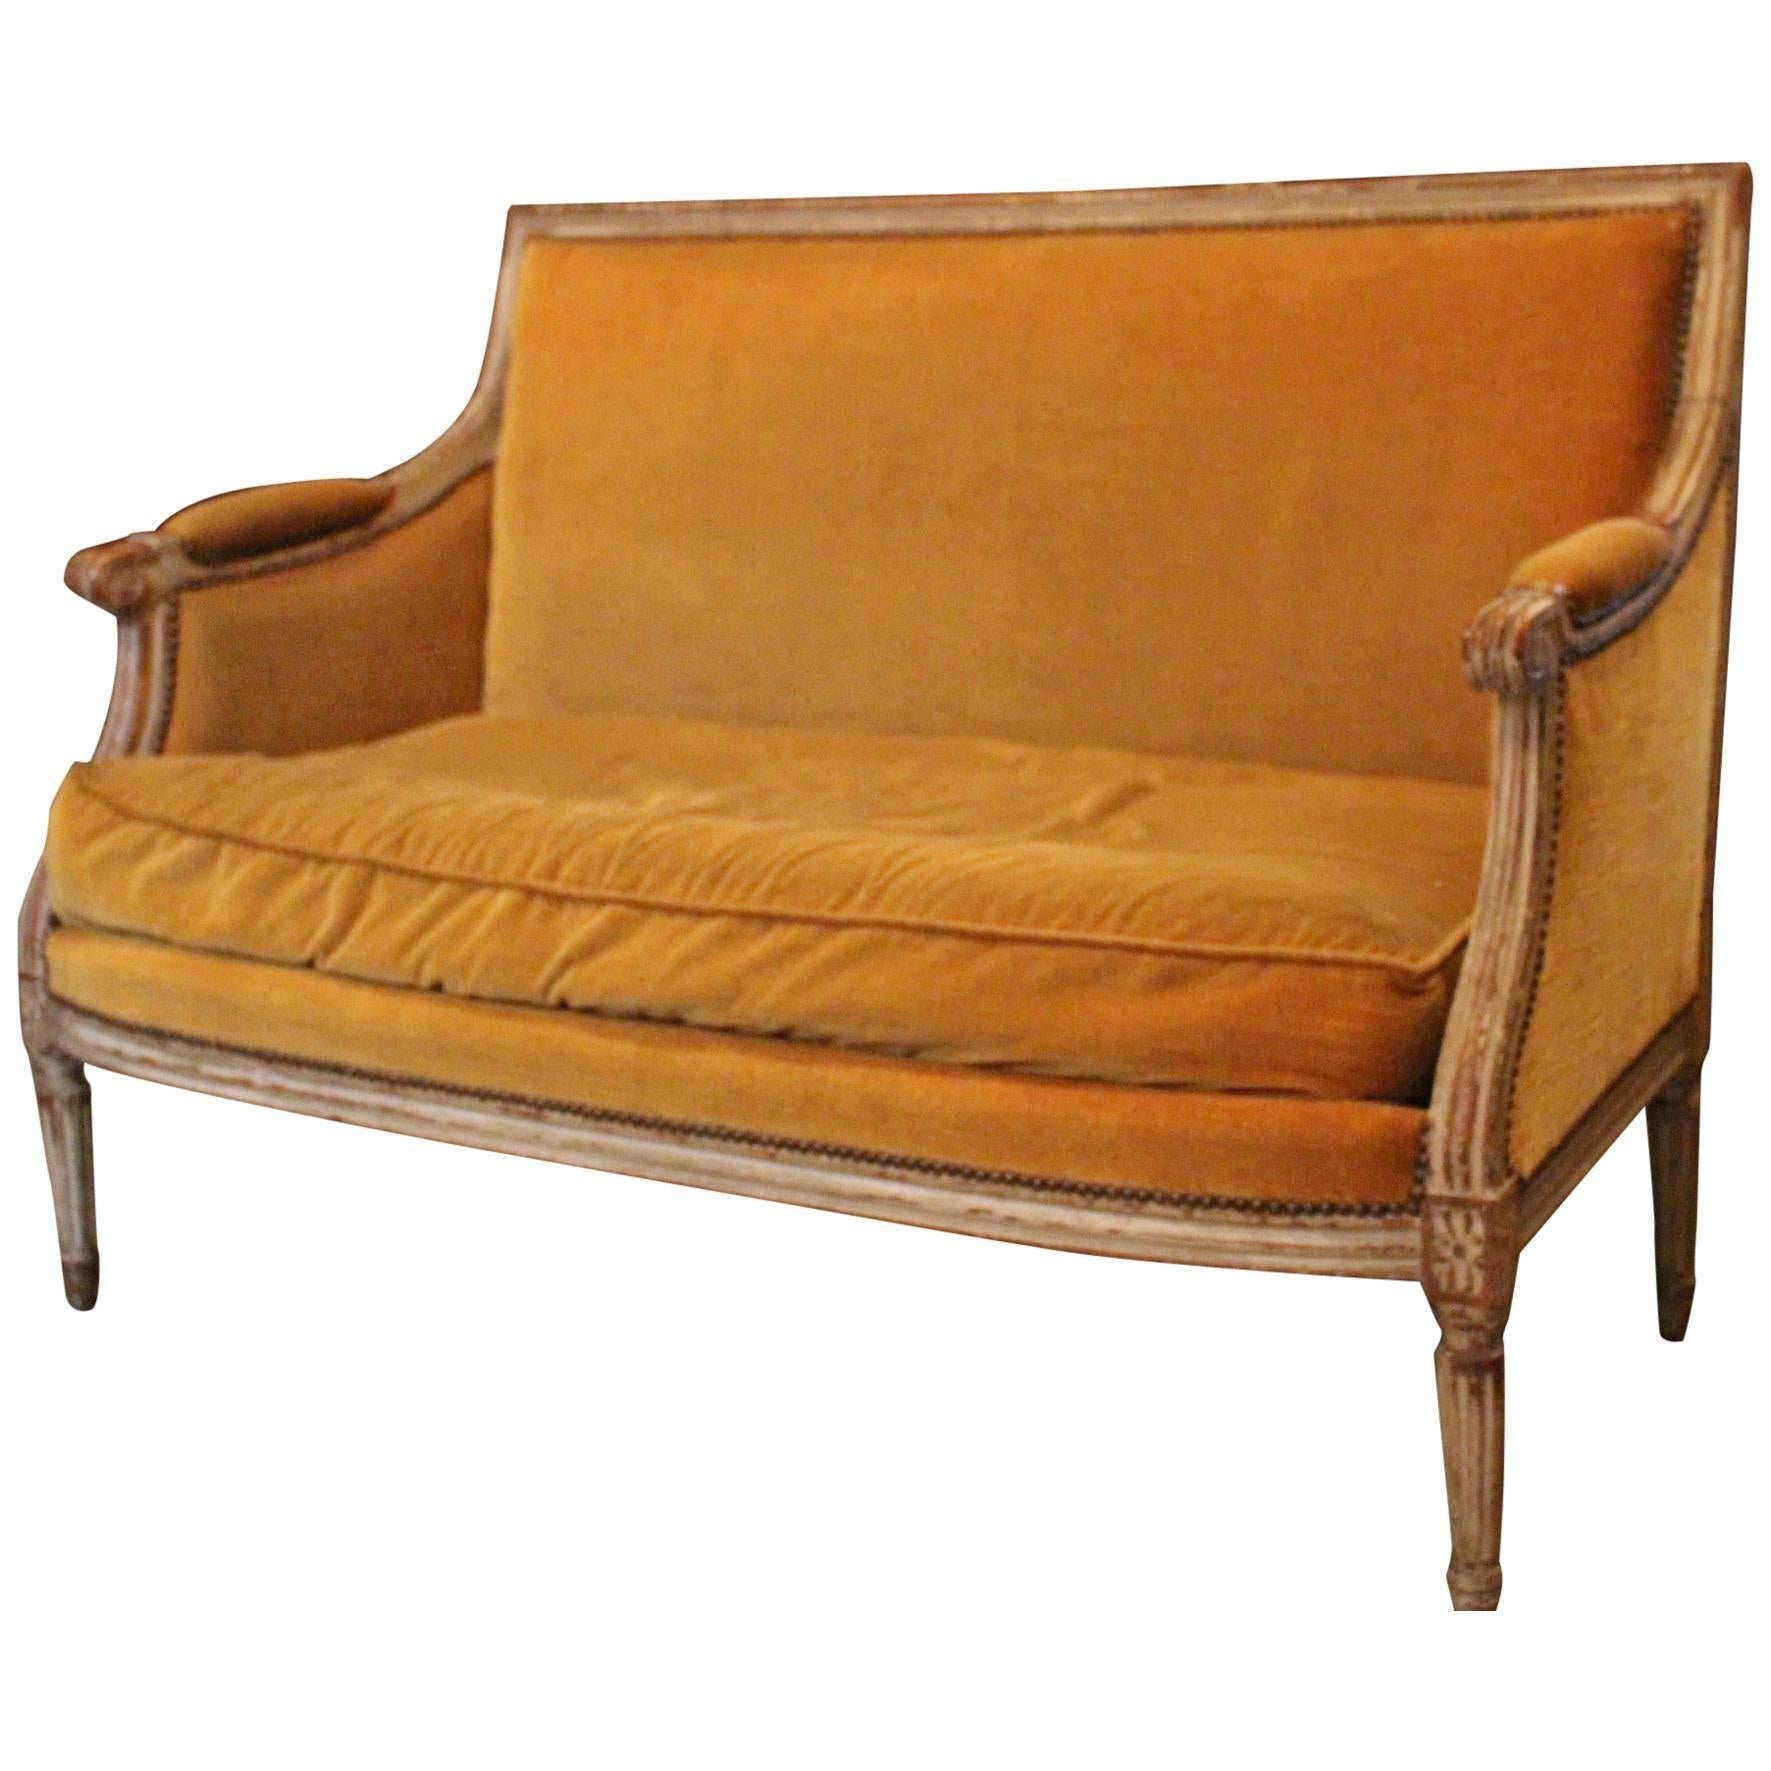 French Louis XVI Style Small Sofa with an Old Painted Finish